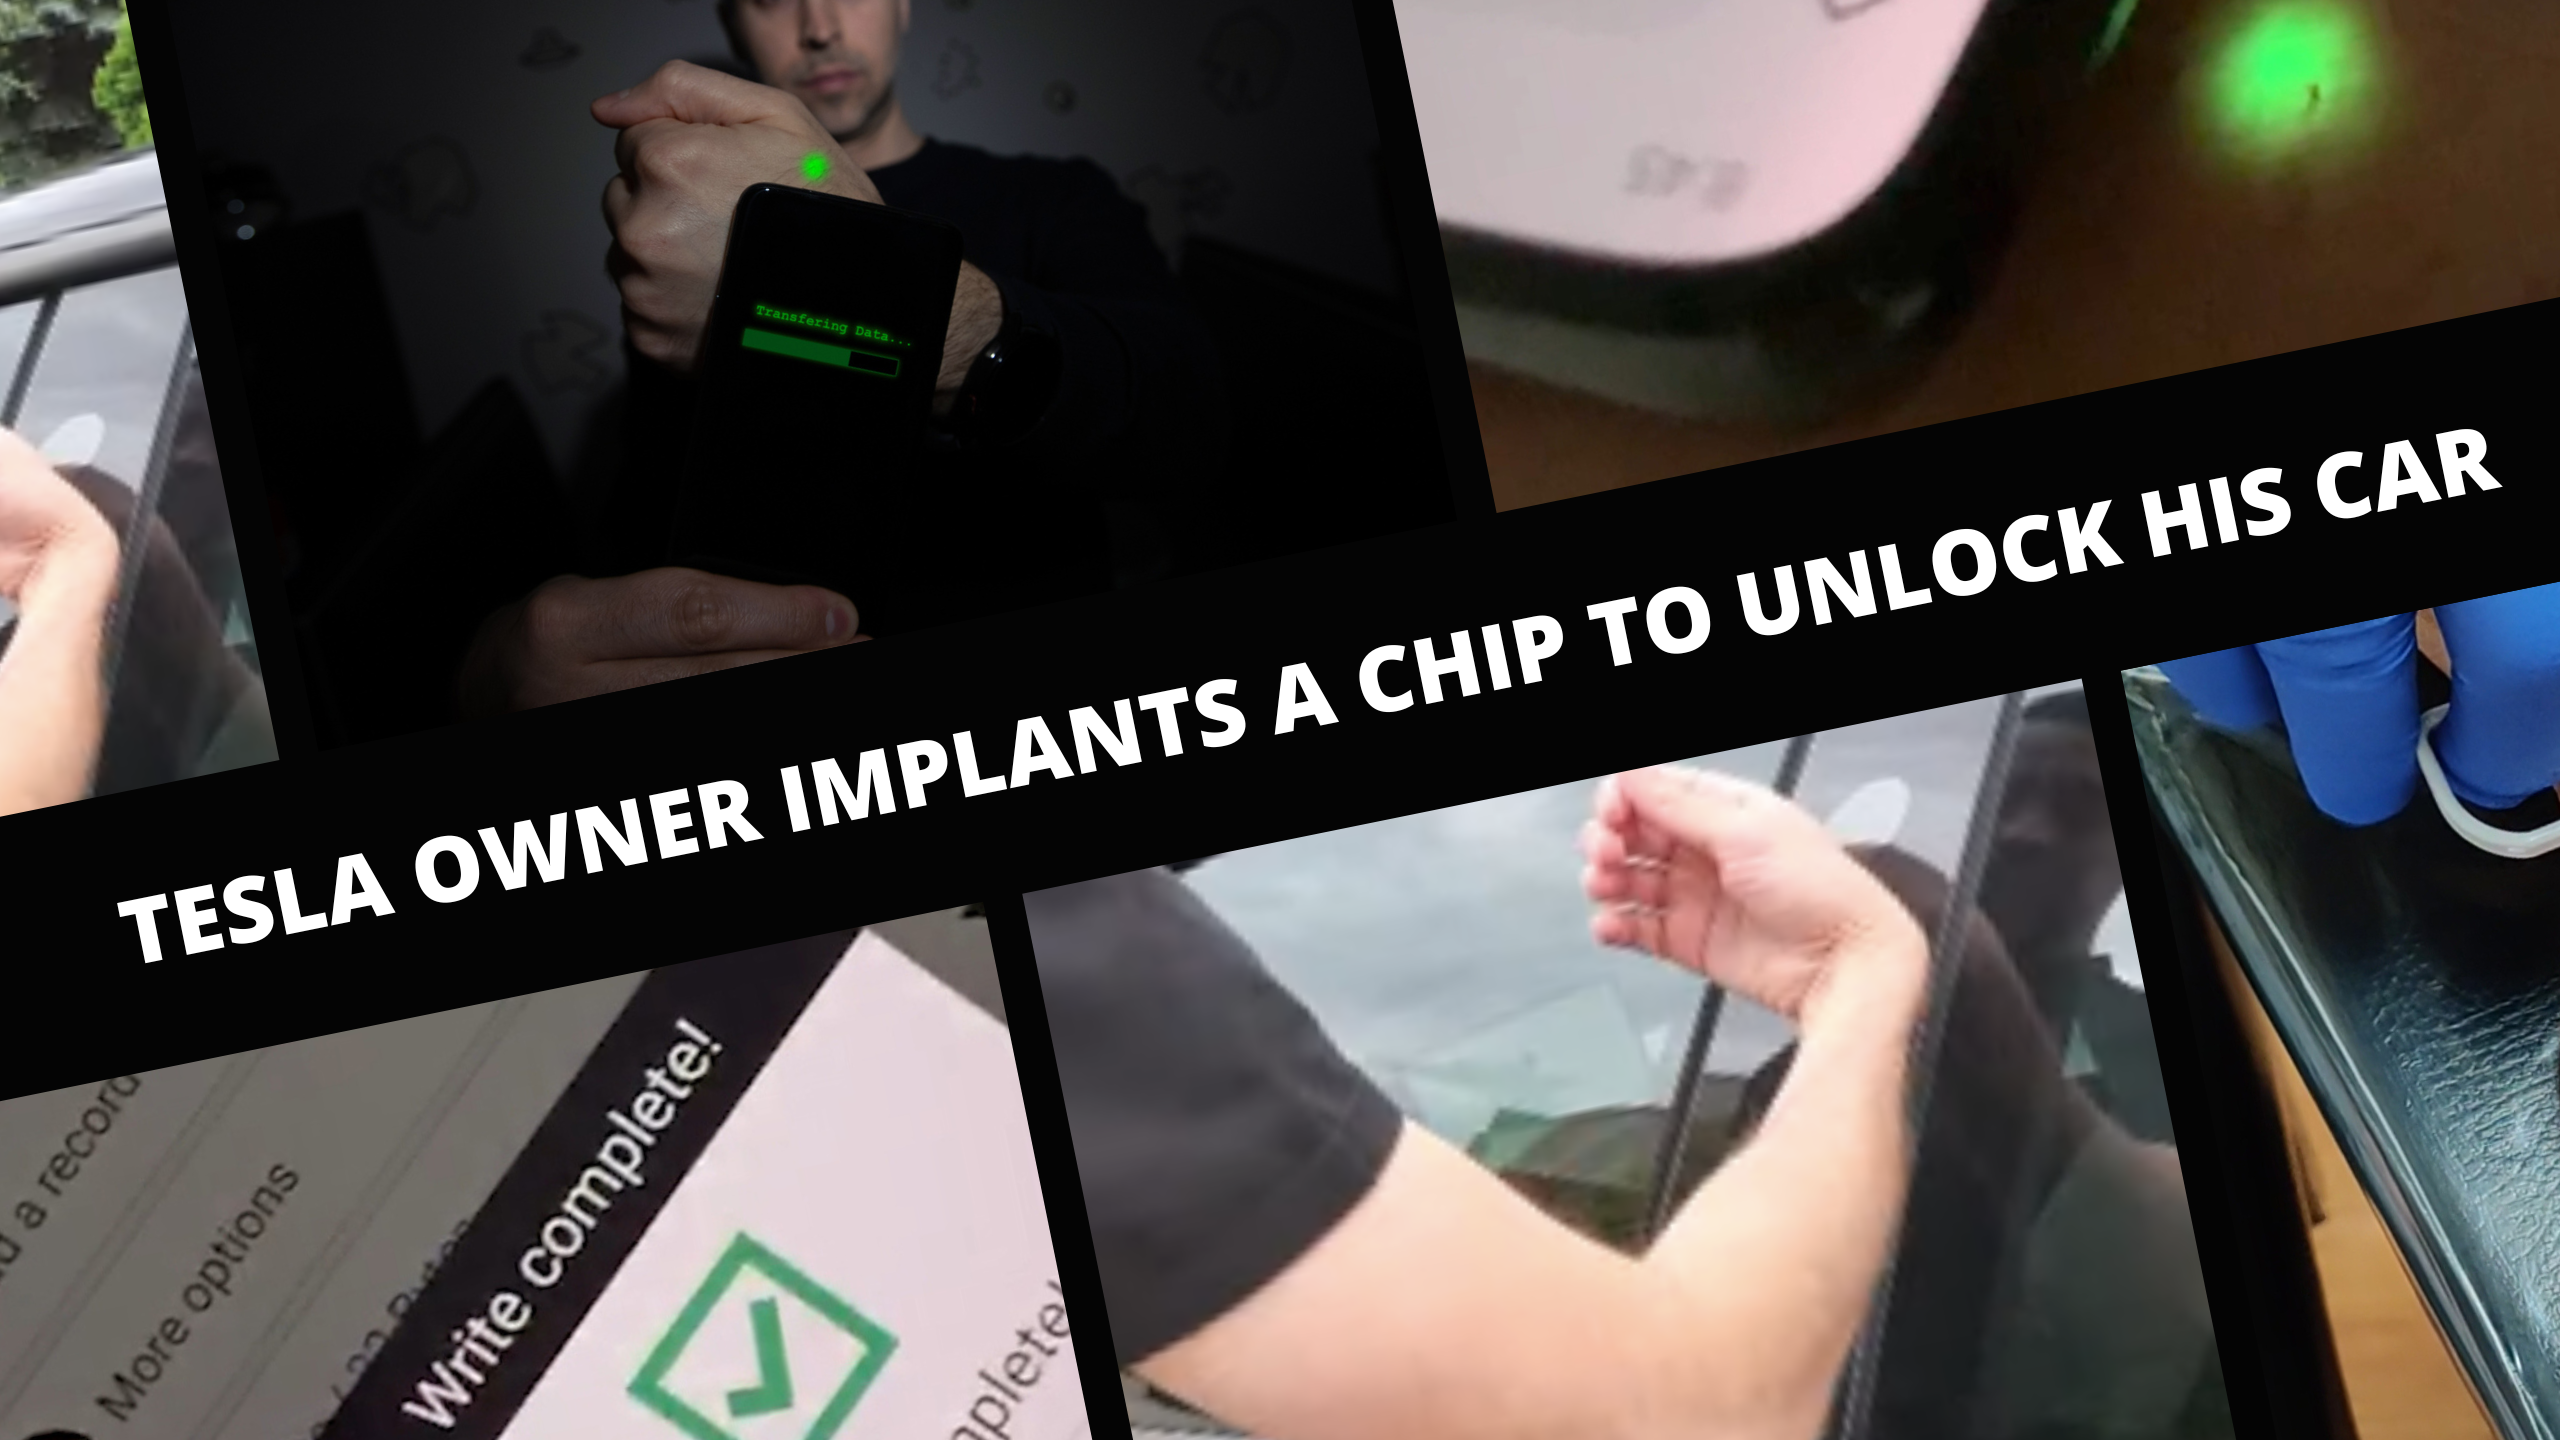 Tesla owner implants a chip to unlock his car and more